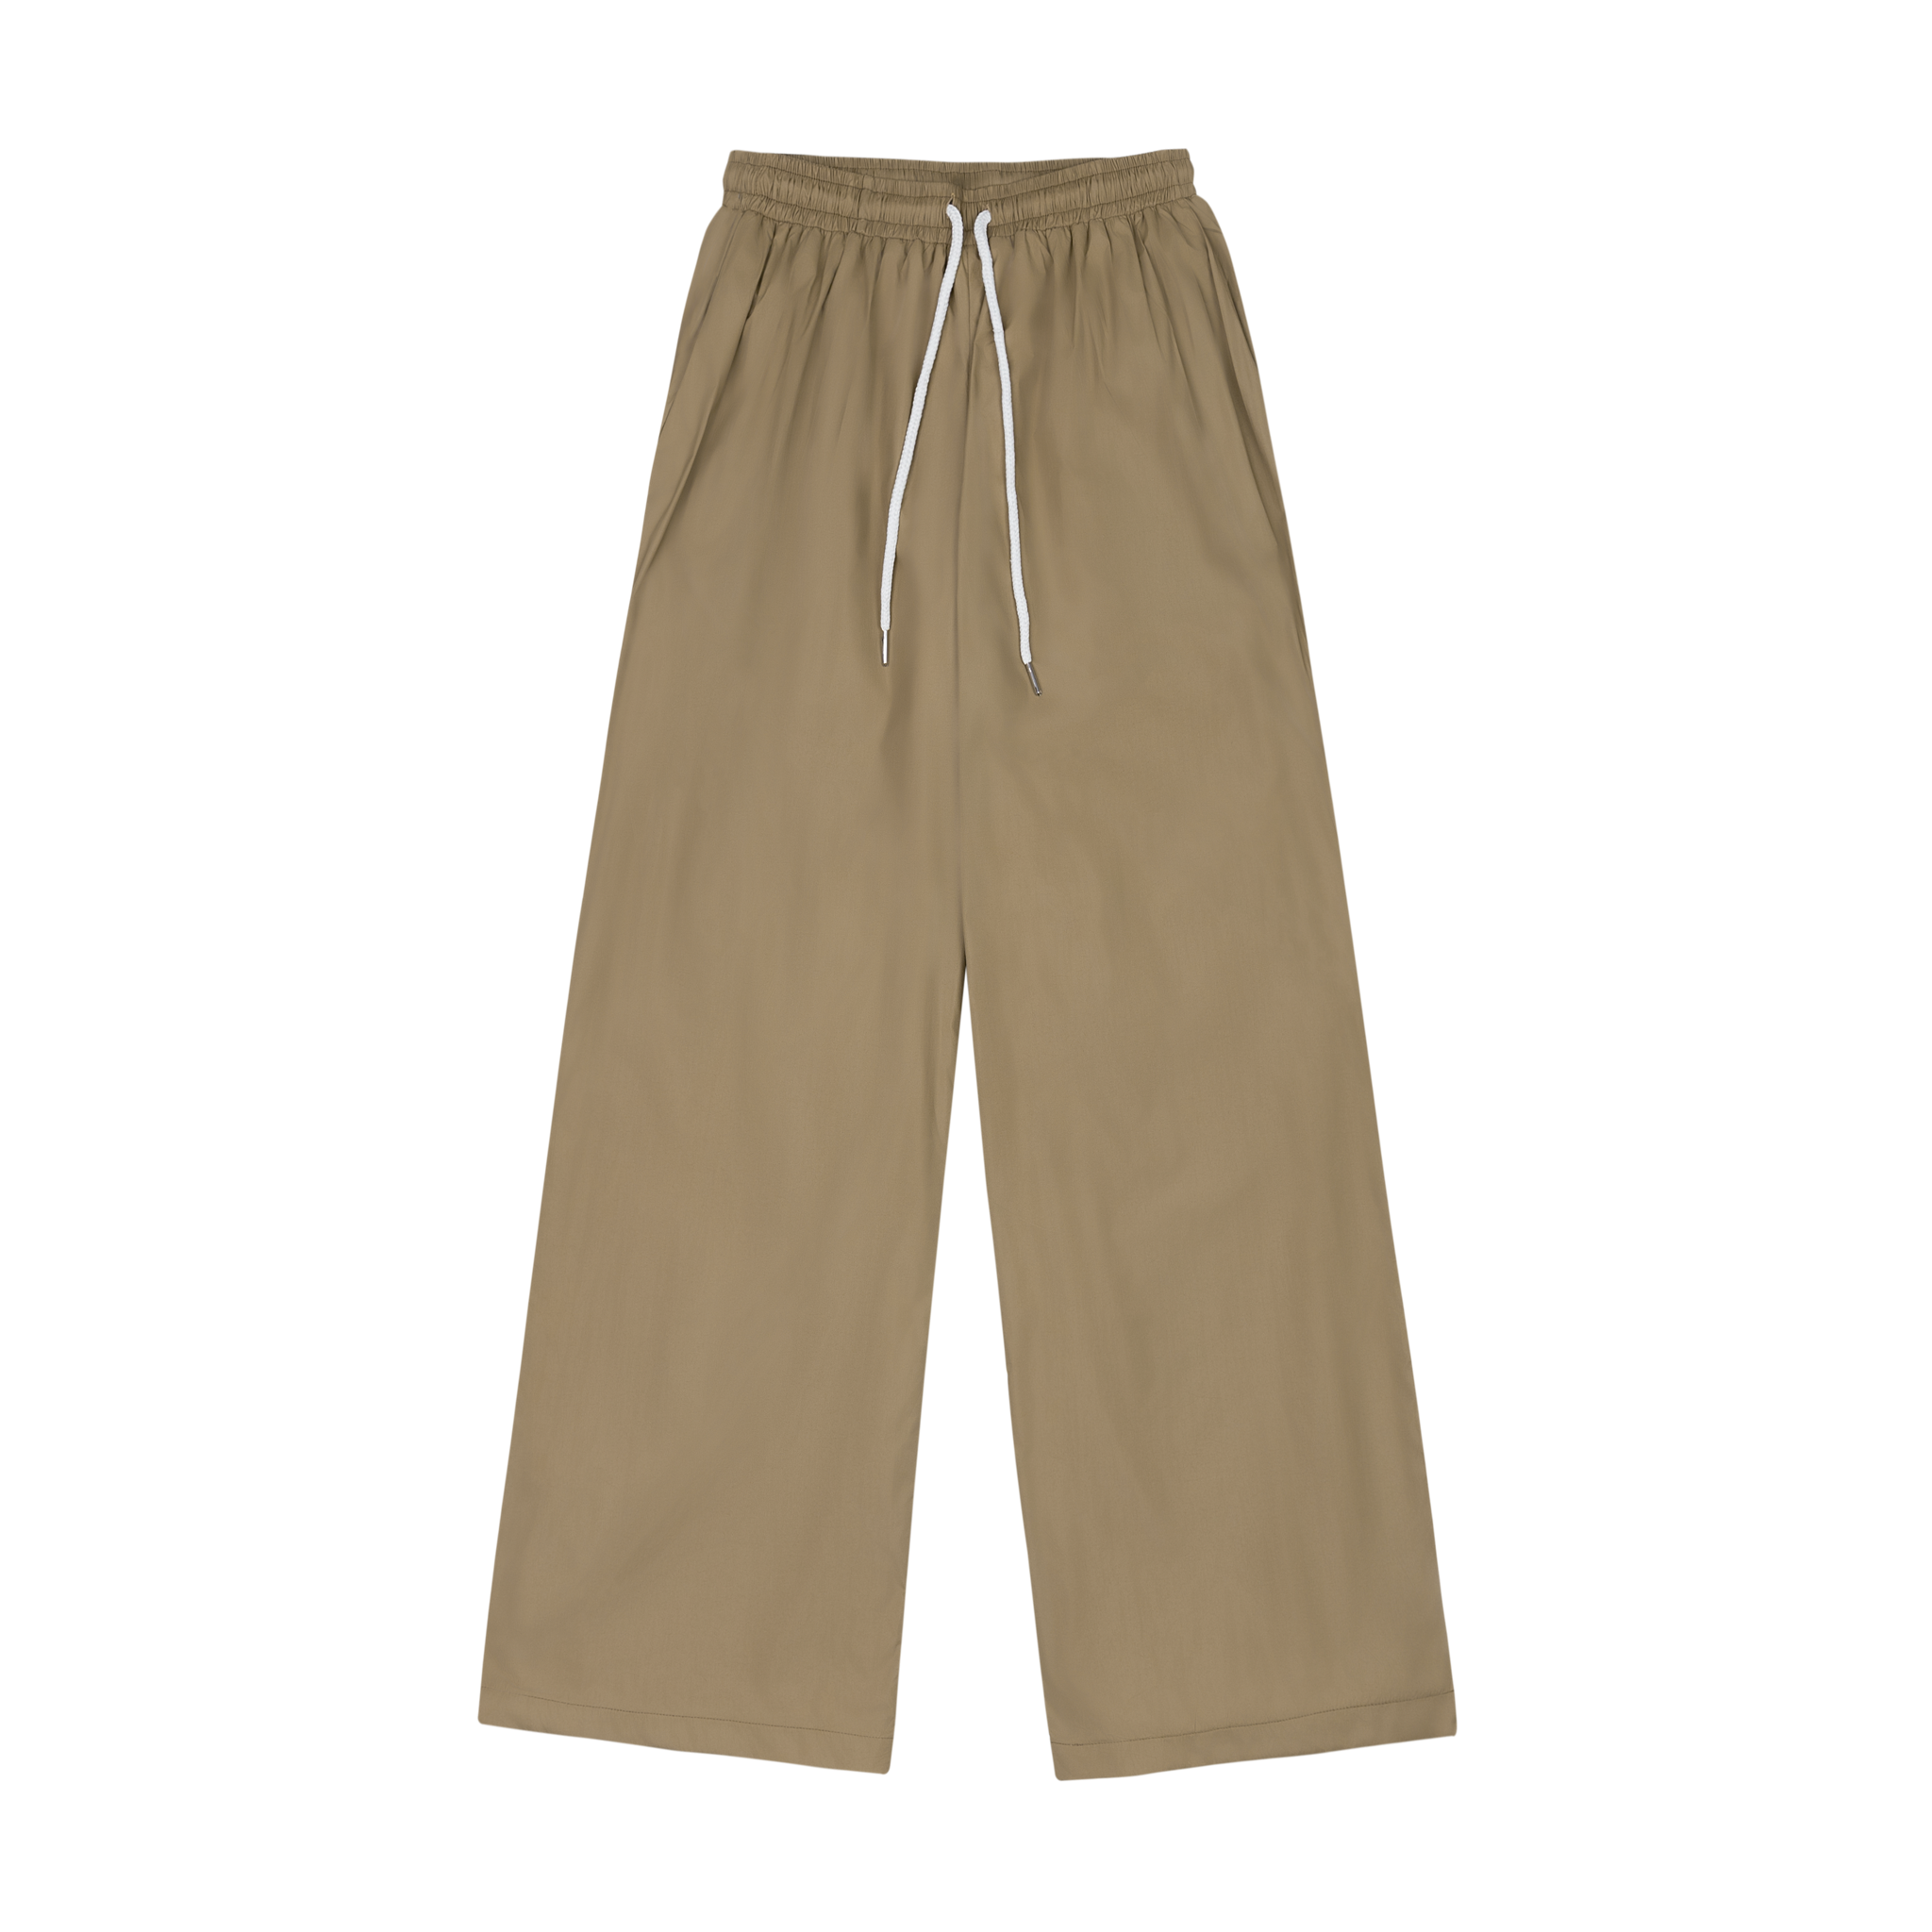 Striped Side Parachute Cargo Pant